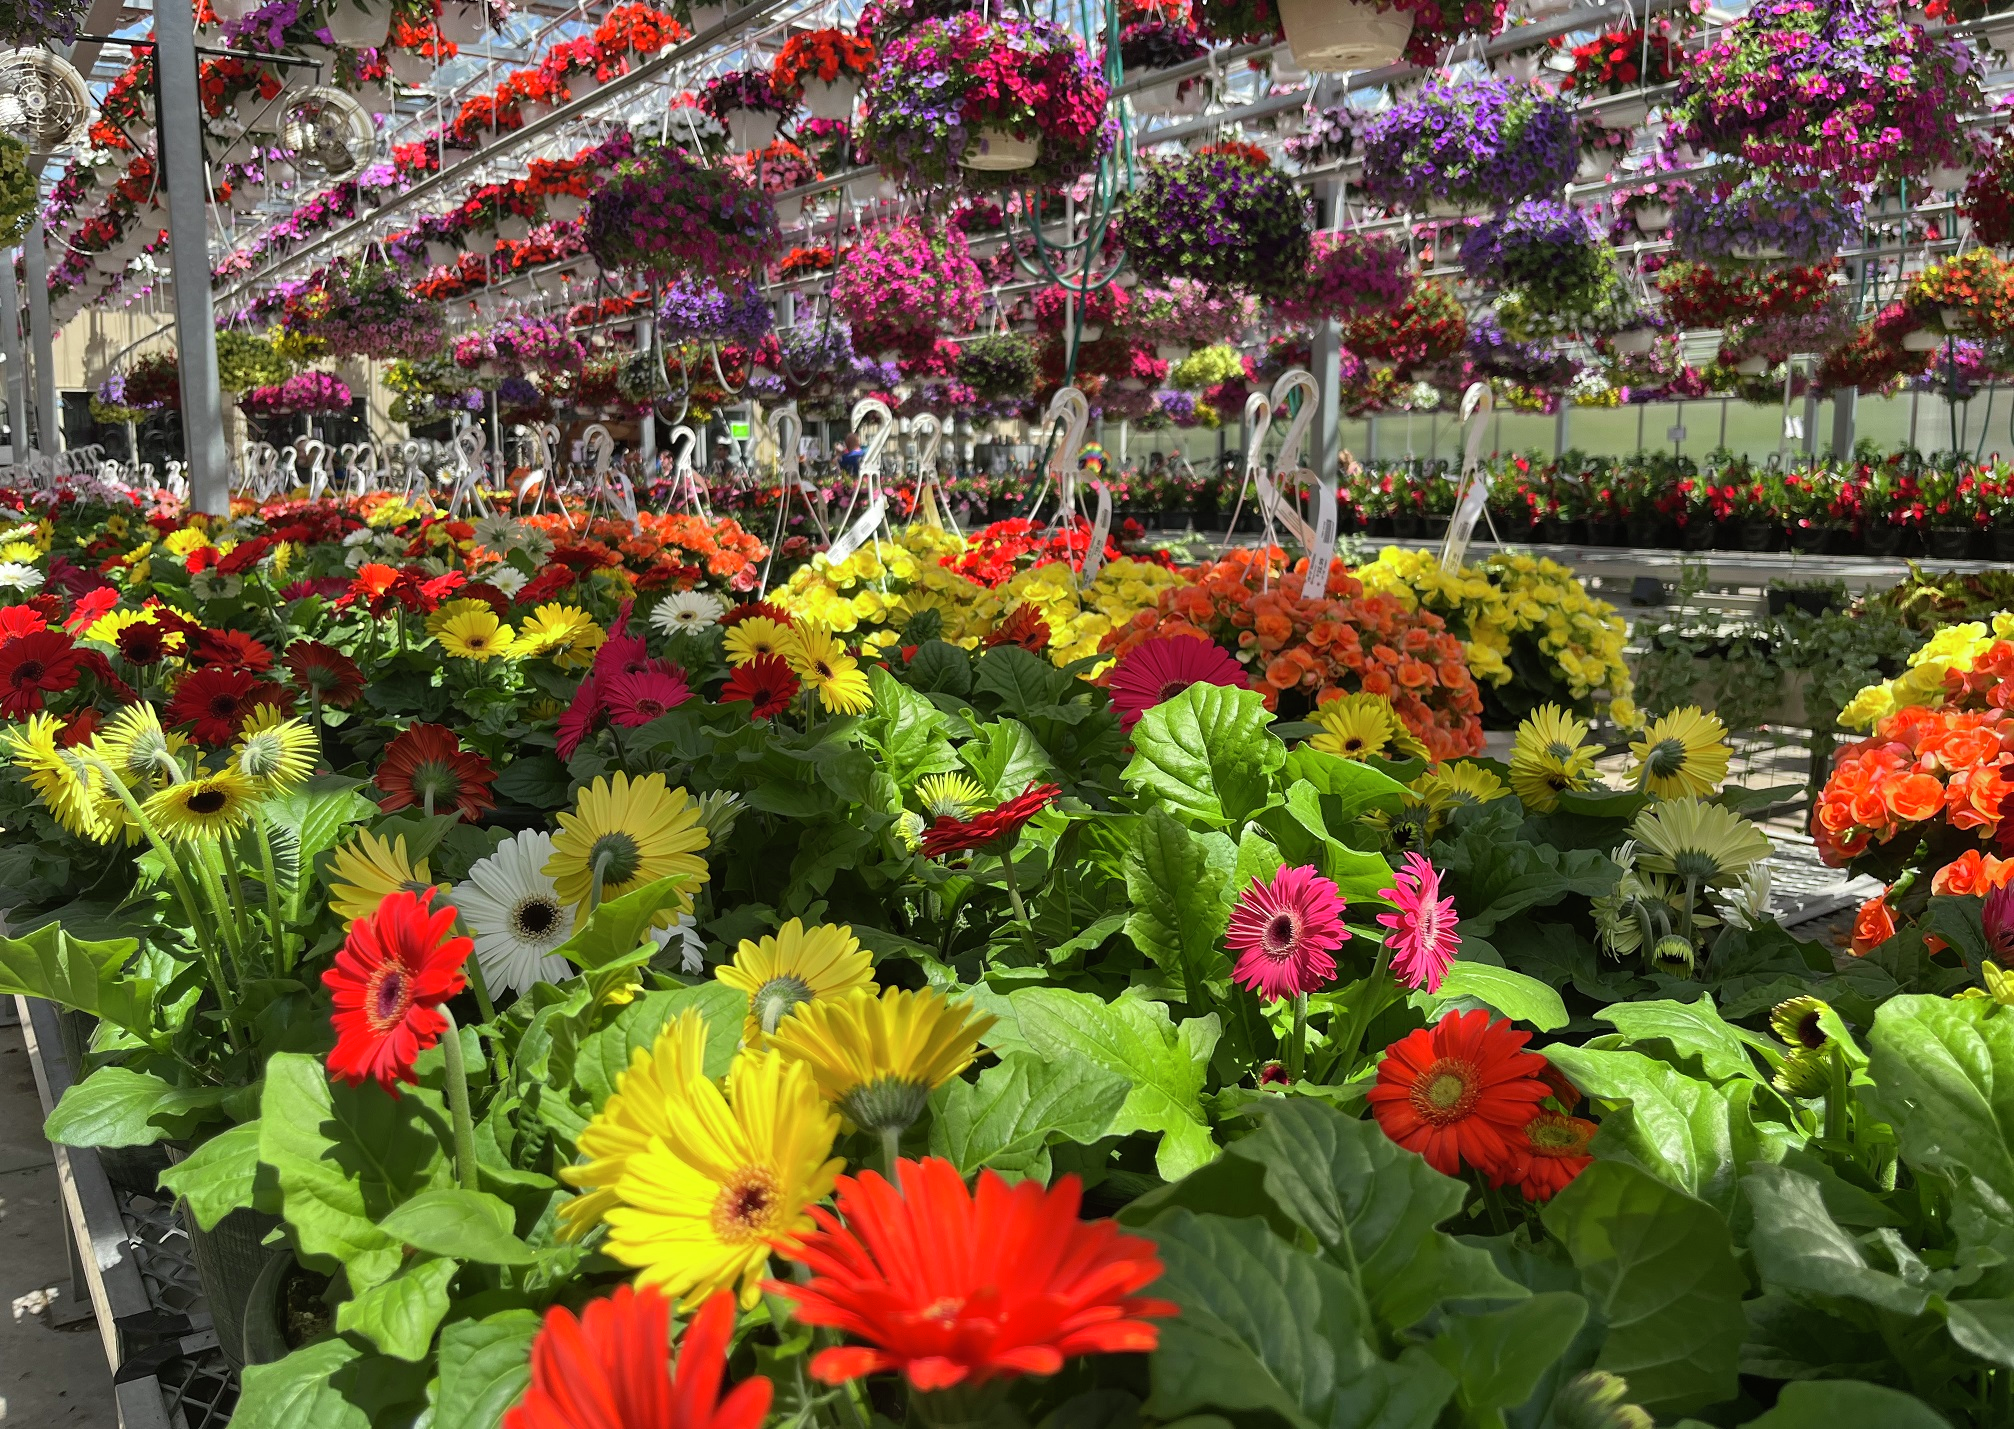 General manager at Adams Nursery & Garden Center in Lancaster, Paul Avery on a busy Memorial Day Weekend ahead